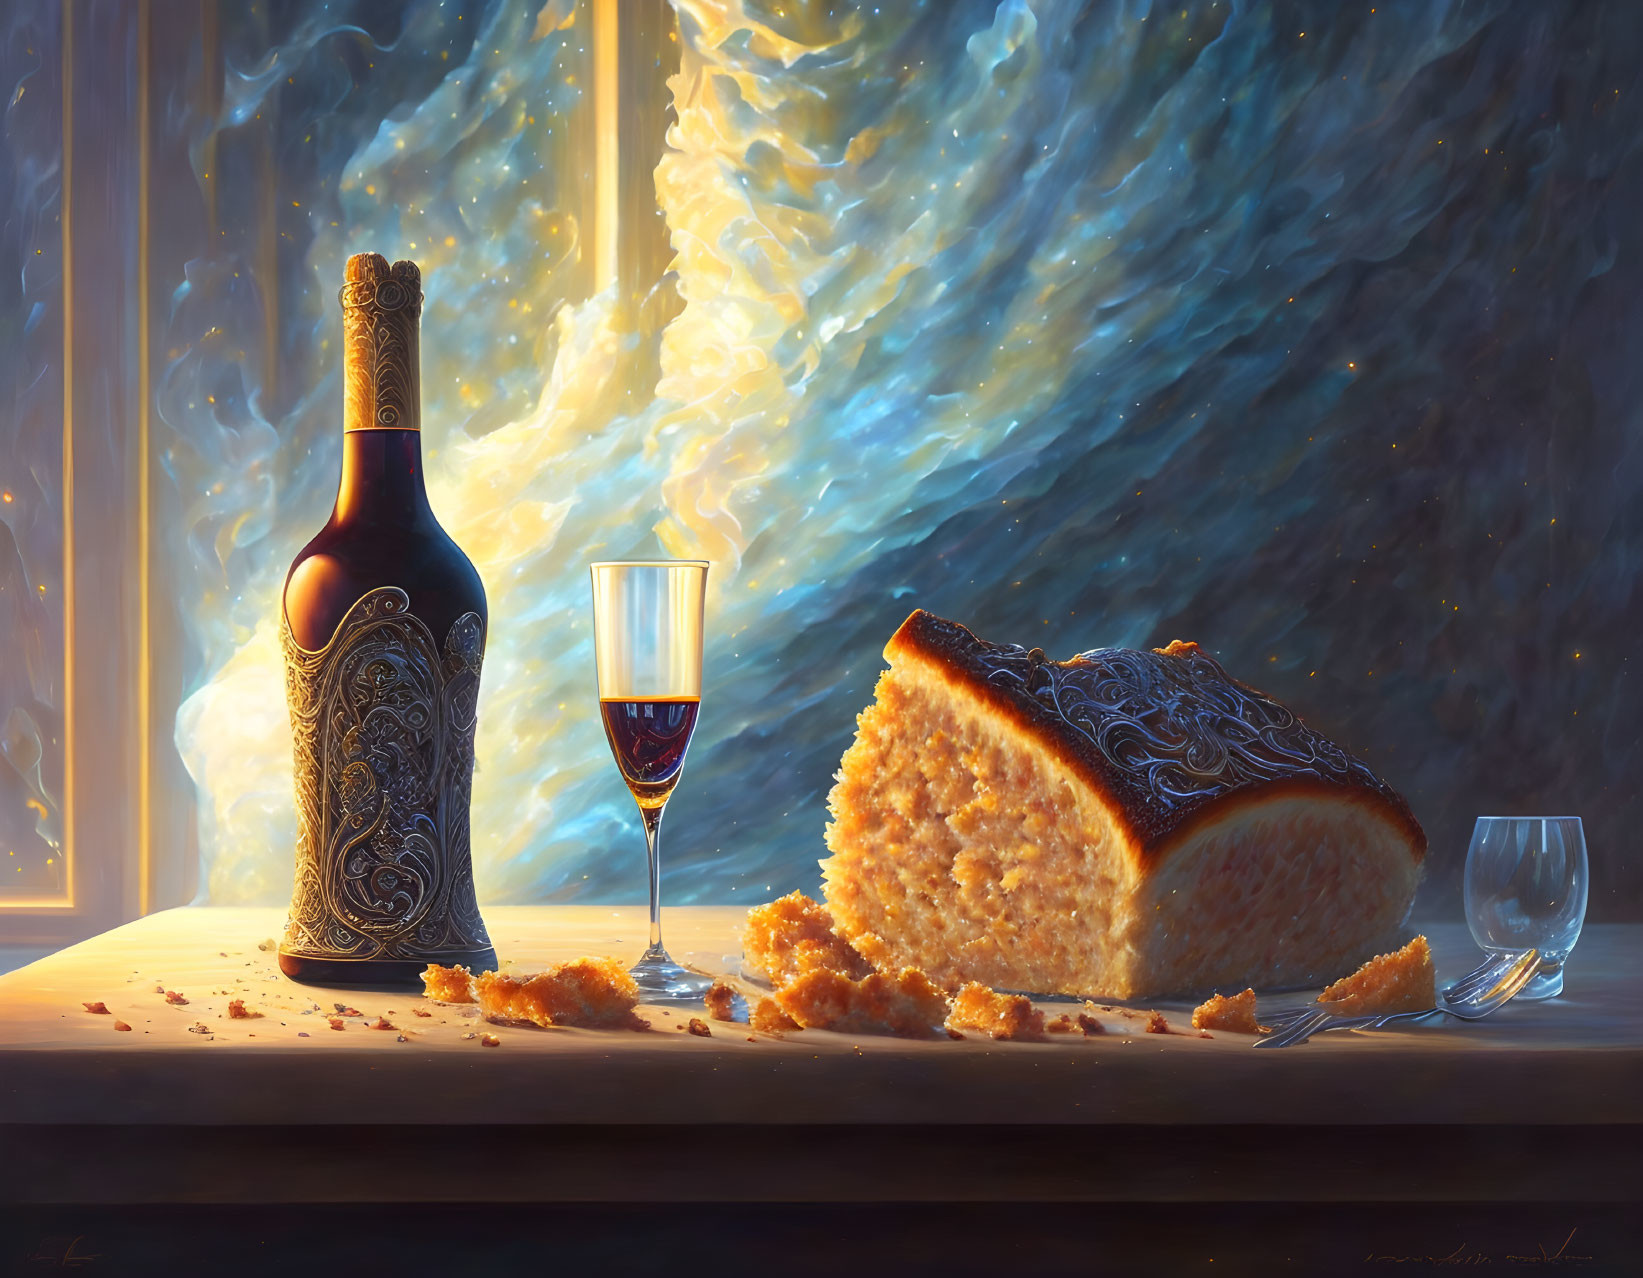 Luxurious wine bottle, glass, and cake on a table with ethereal light